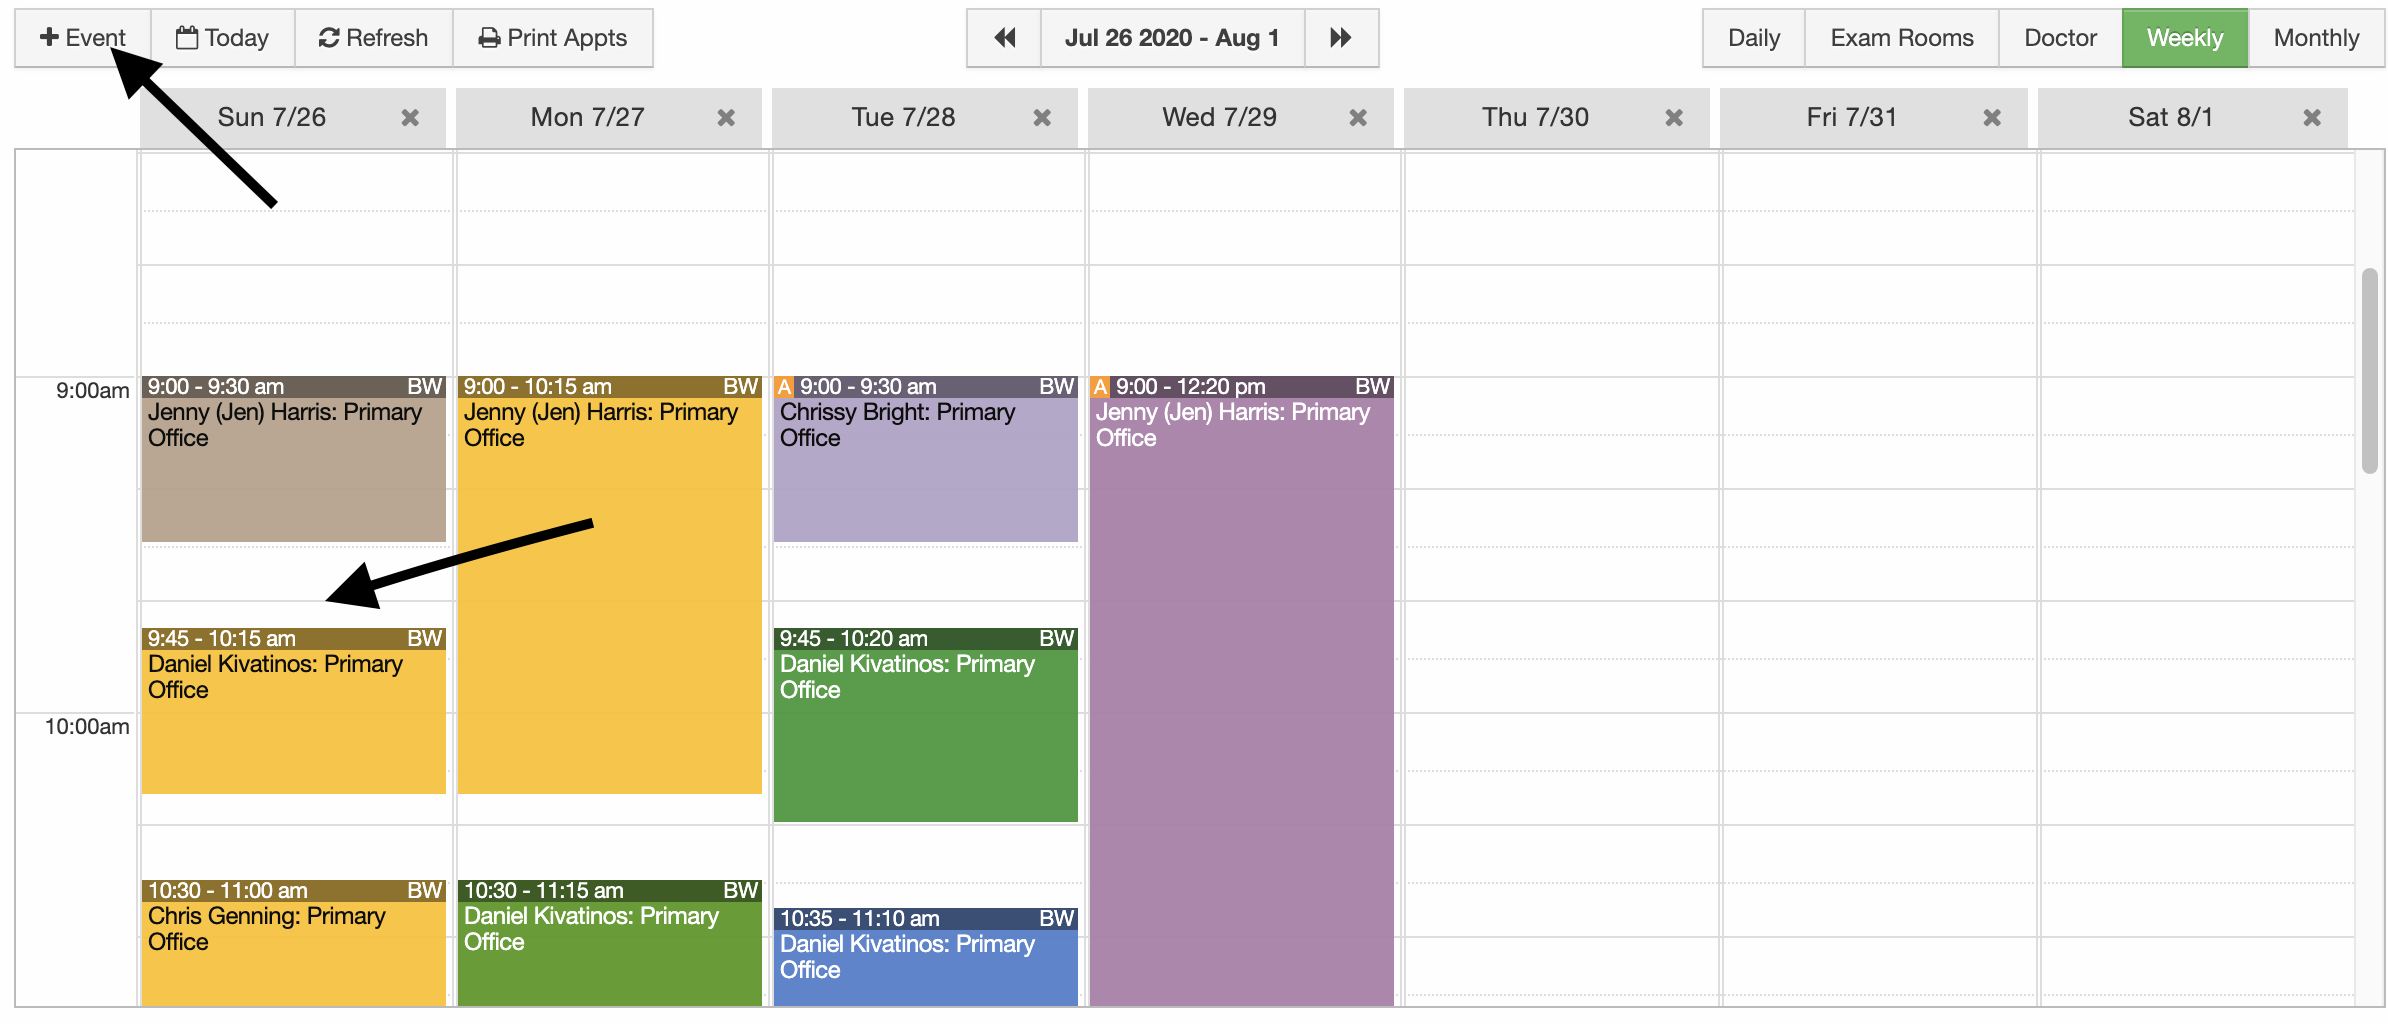 Schedule_Calendar_Event_Time_slot.png